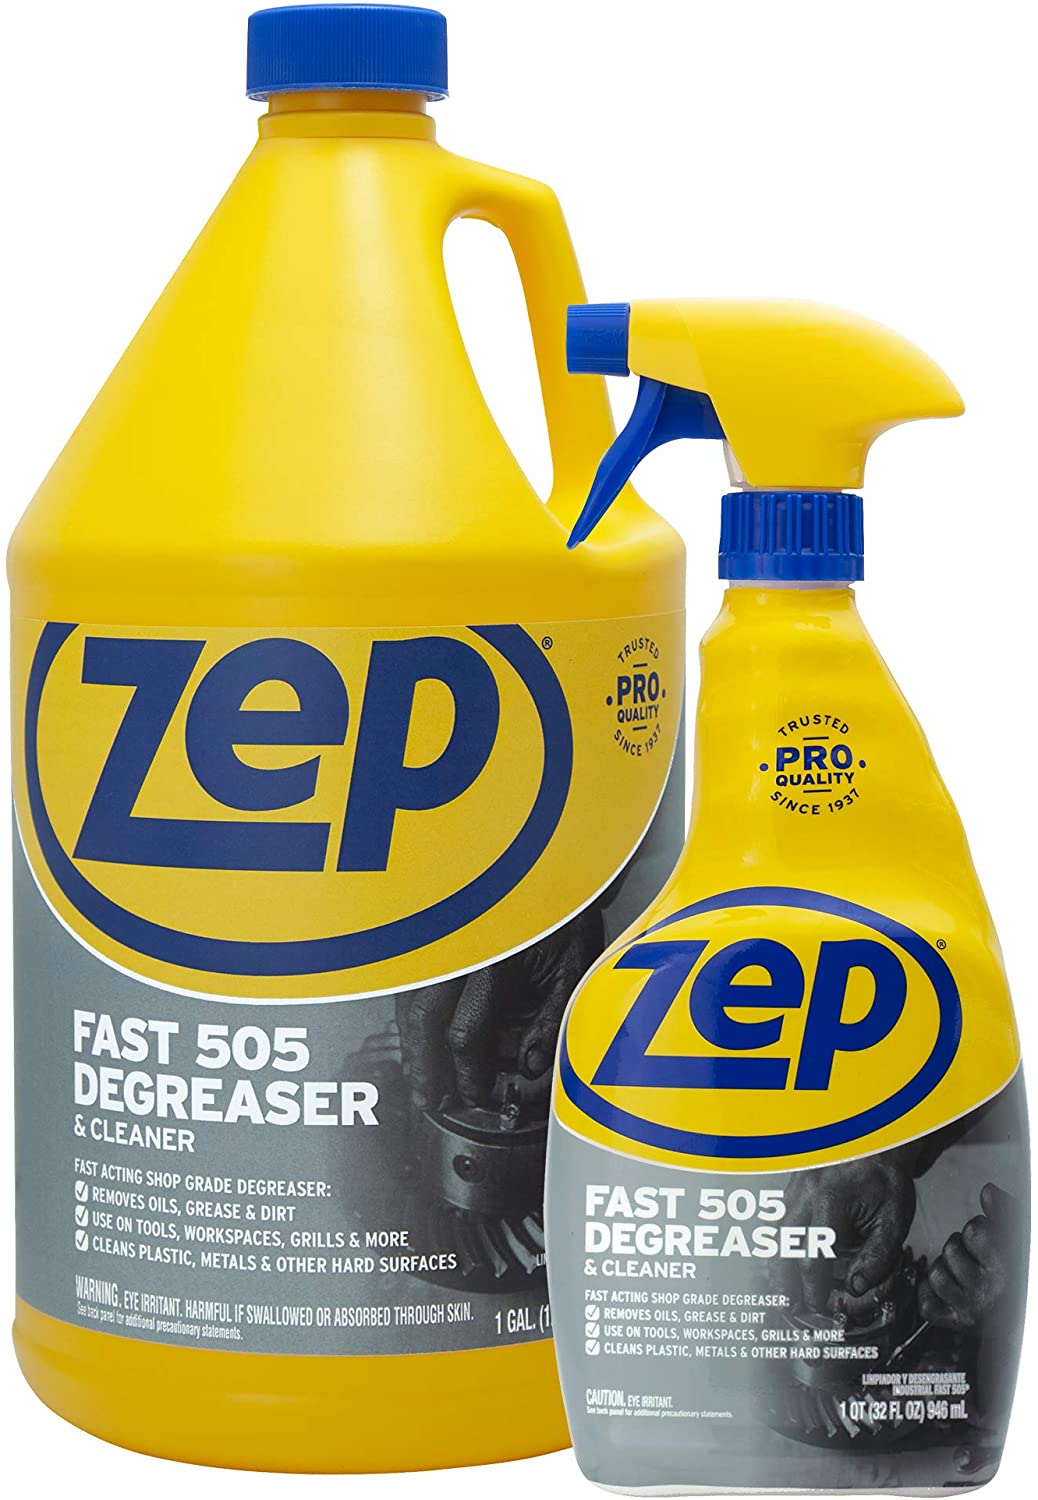 Zep Fast 505 128-fl oz Degreaser (4-Pack) in the Degreasers